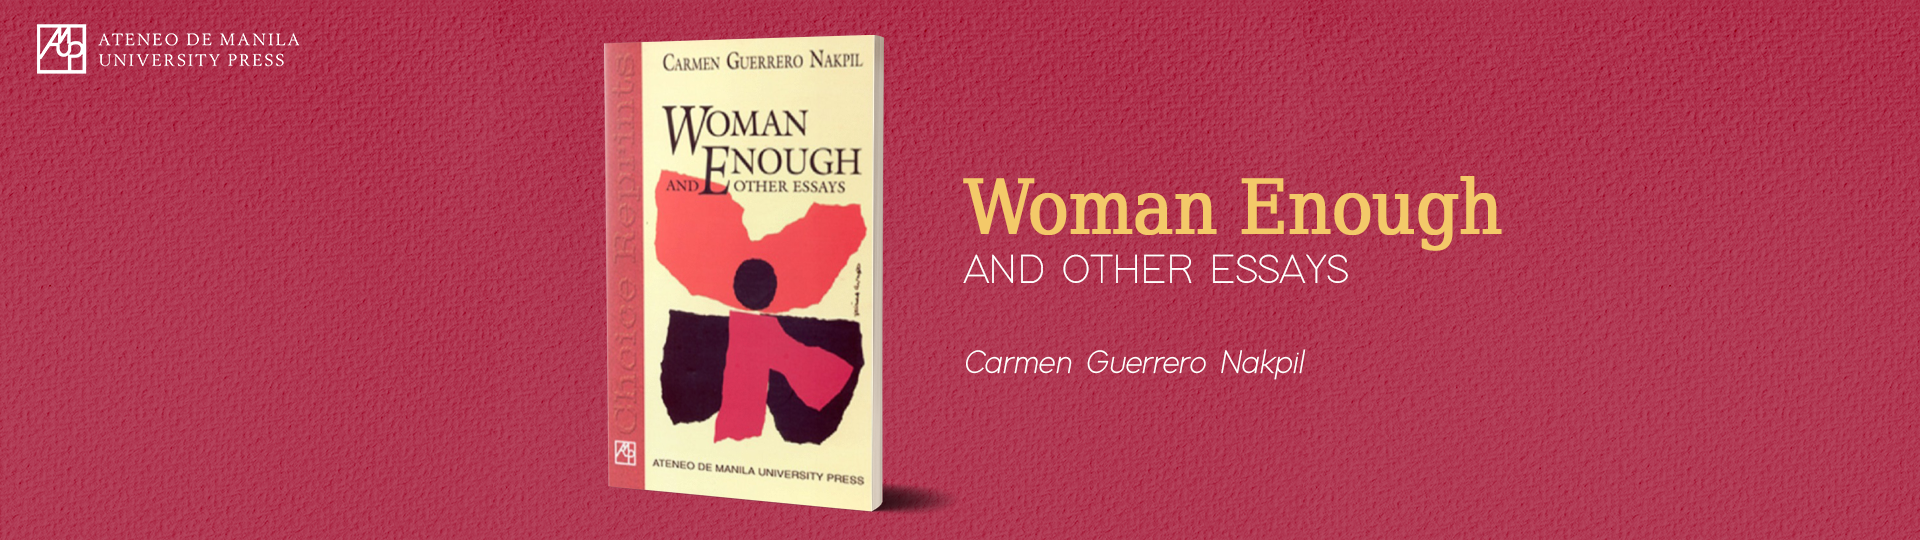 5 must-read book for Women's Month - Woman Enough and Other Essays